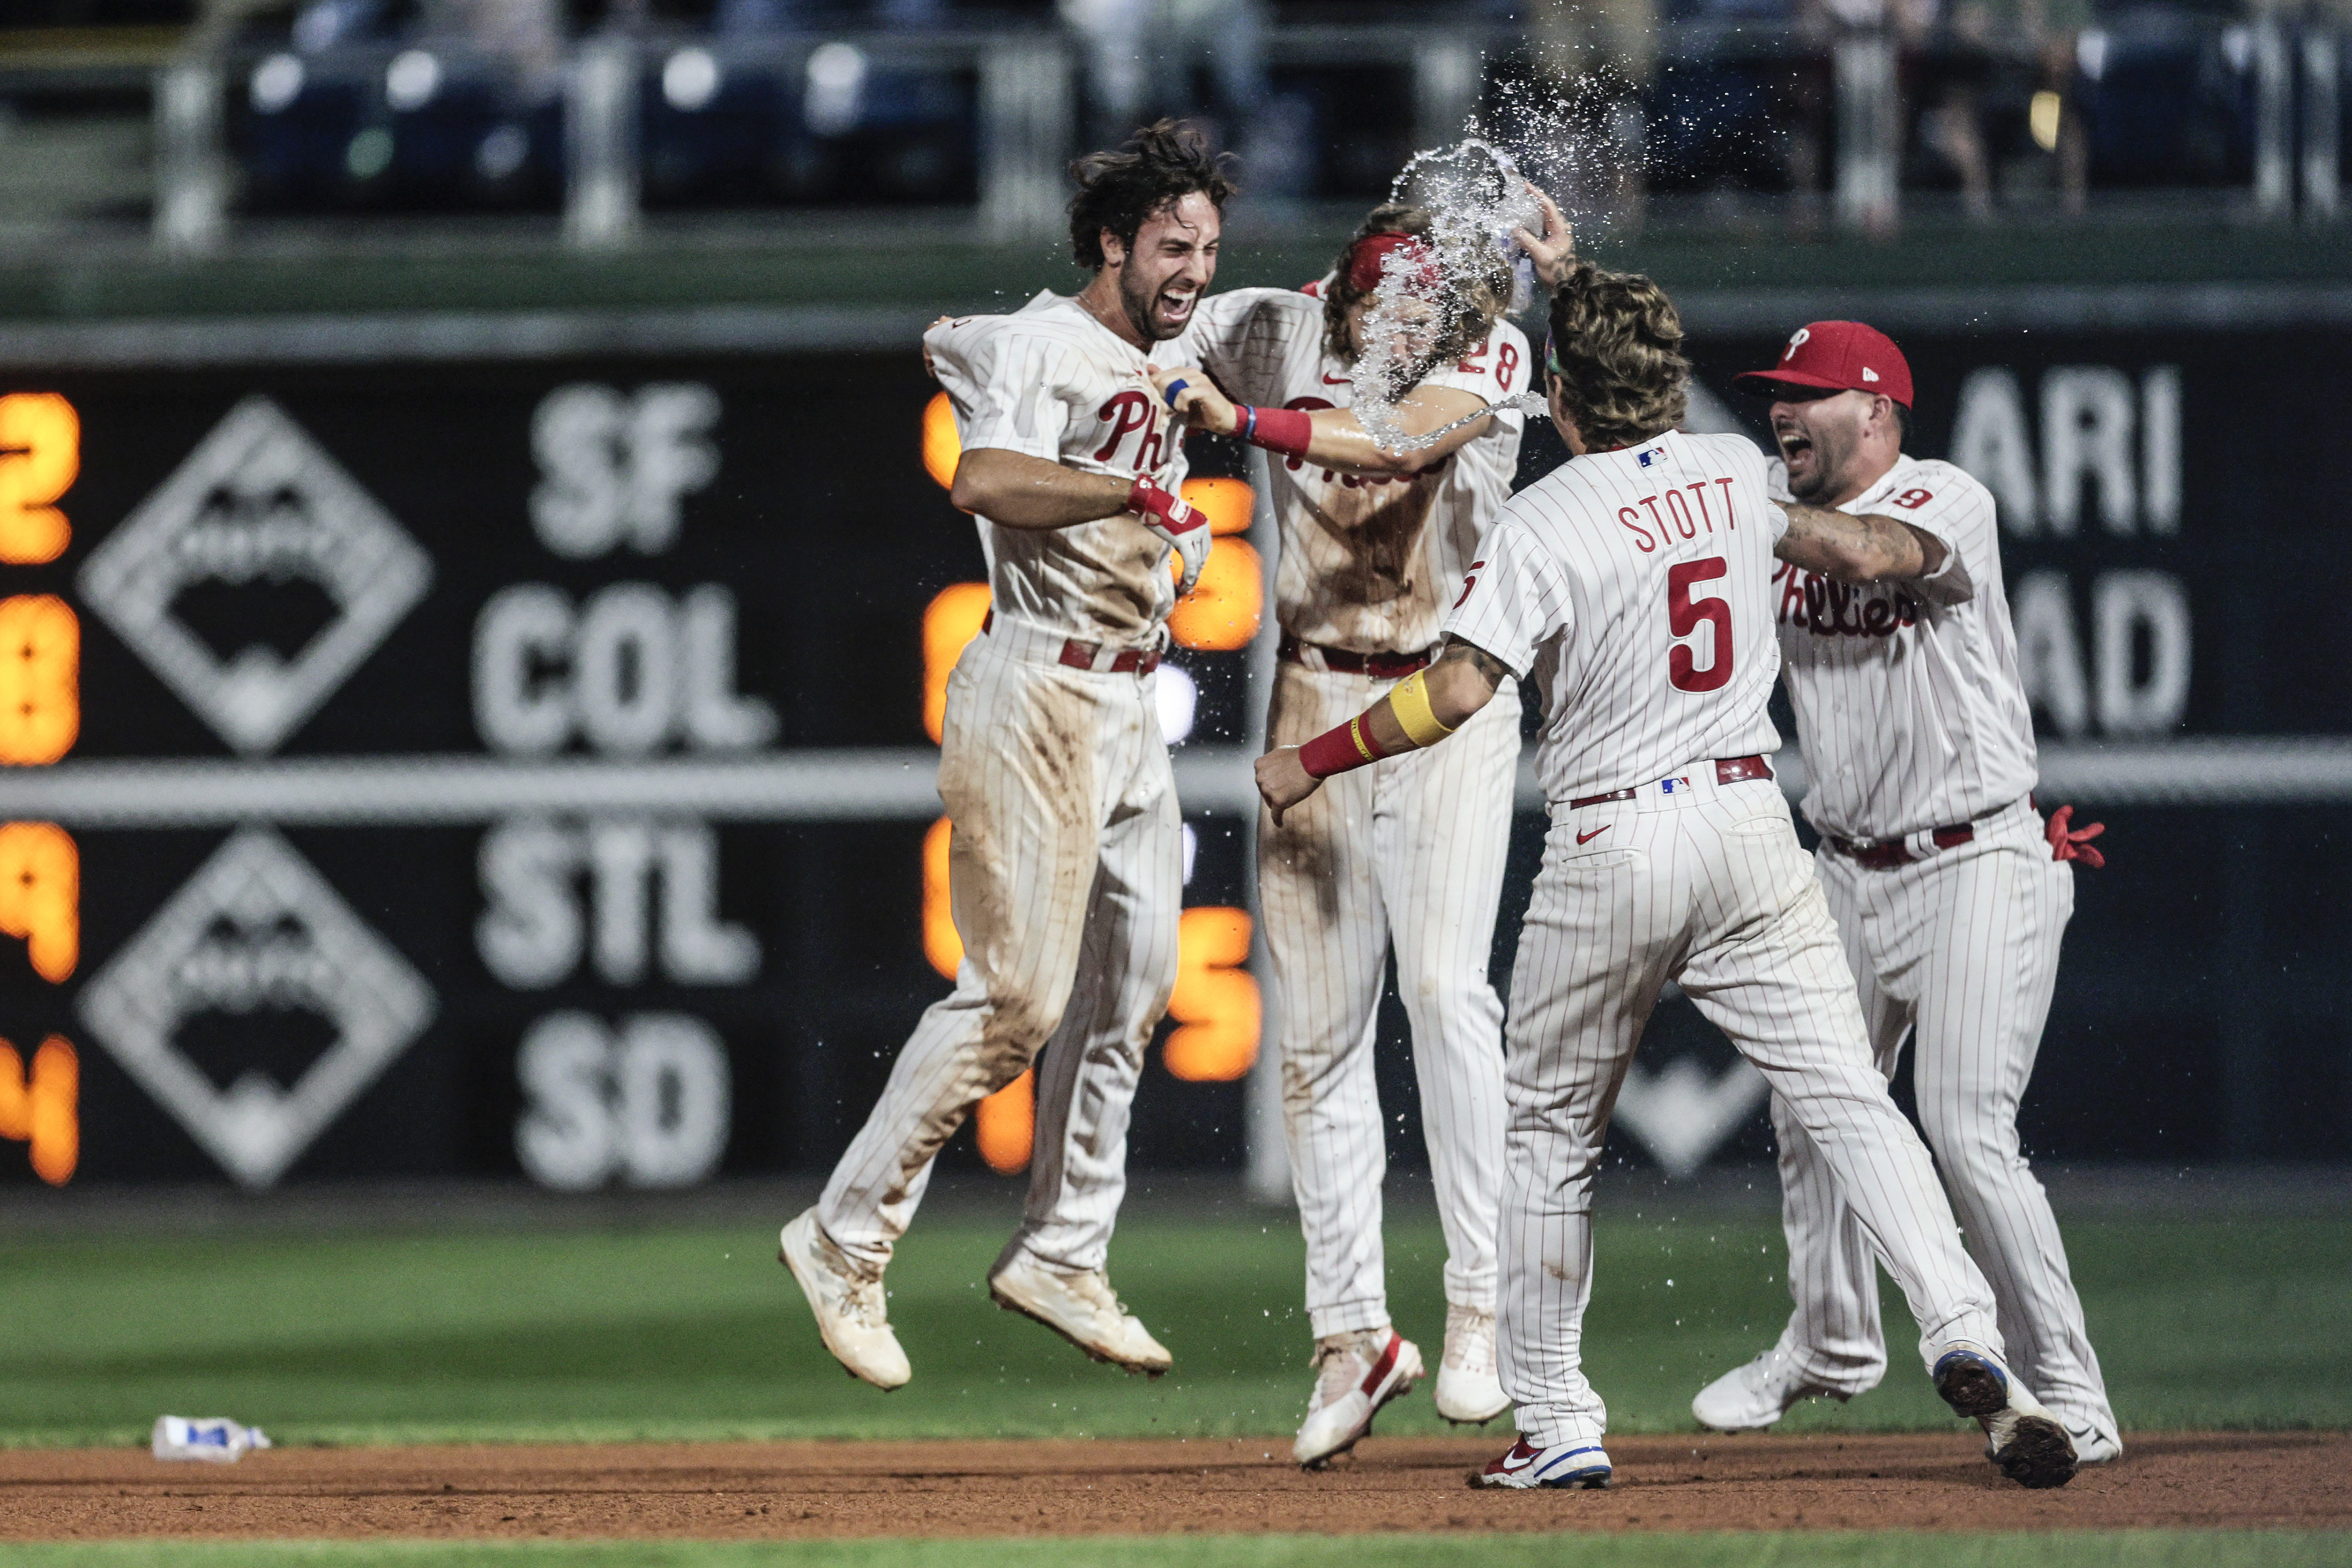 Phillies stage MONSTER COMEBACK! From down 7-0 to winning 15-8! 